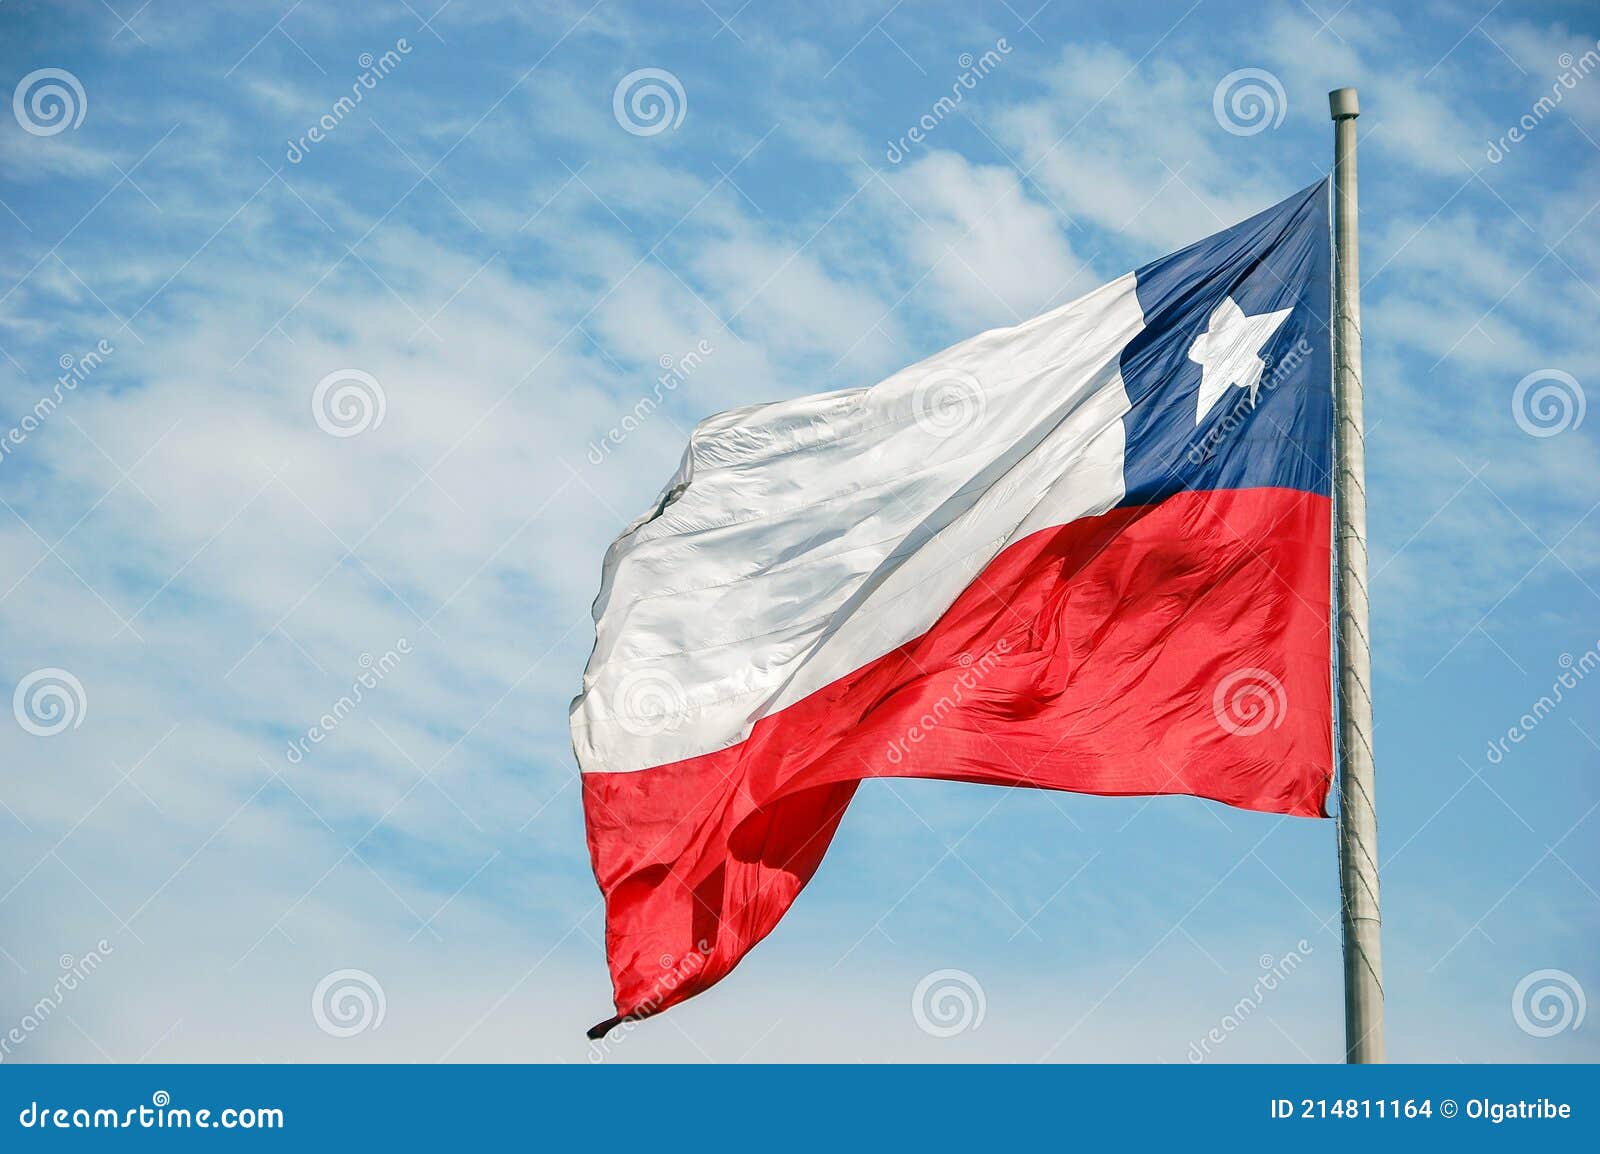 big chilena flag waving in front on blue sky with copy space.